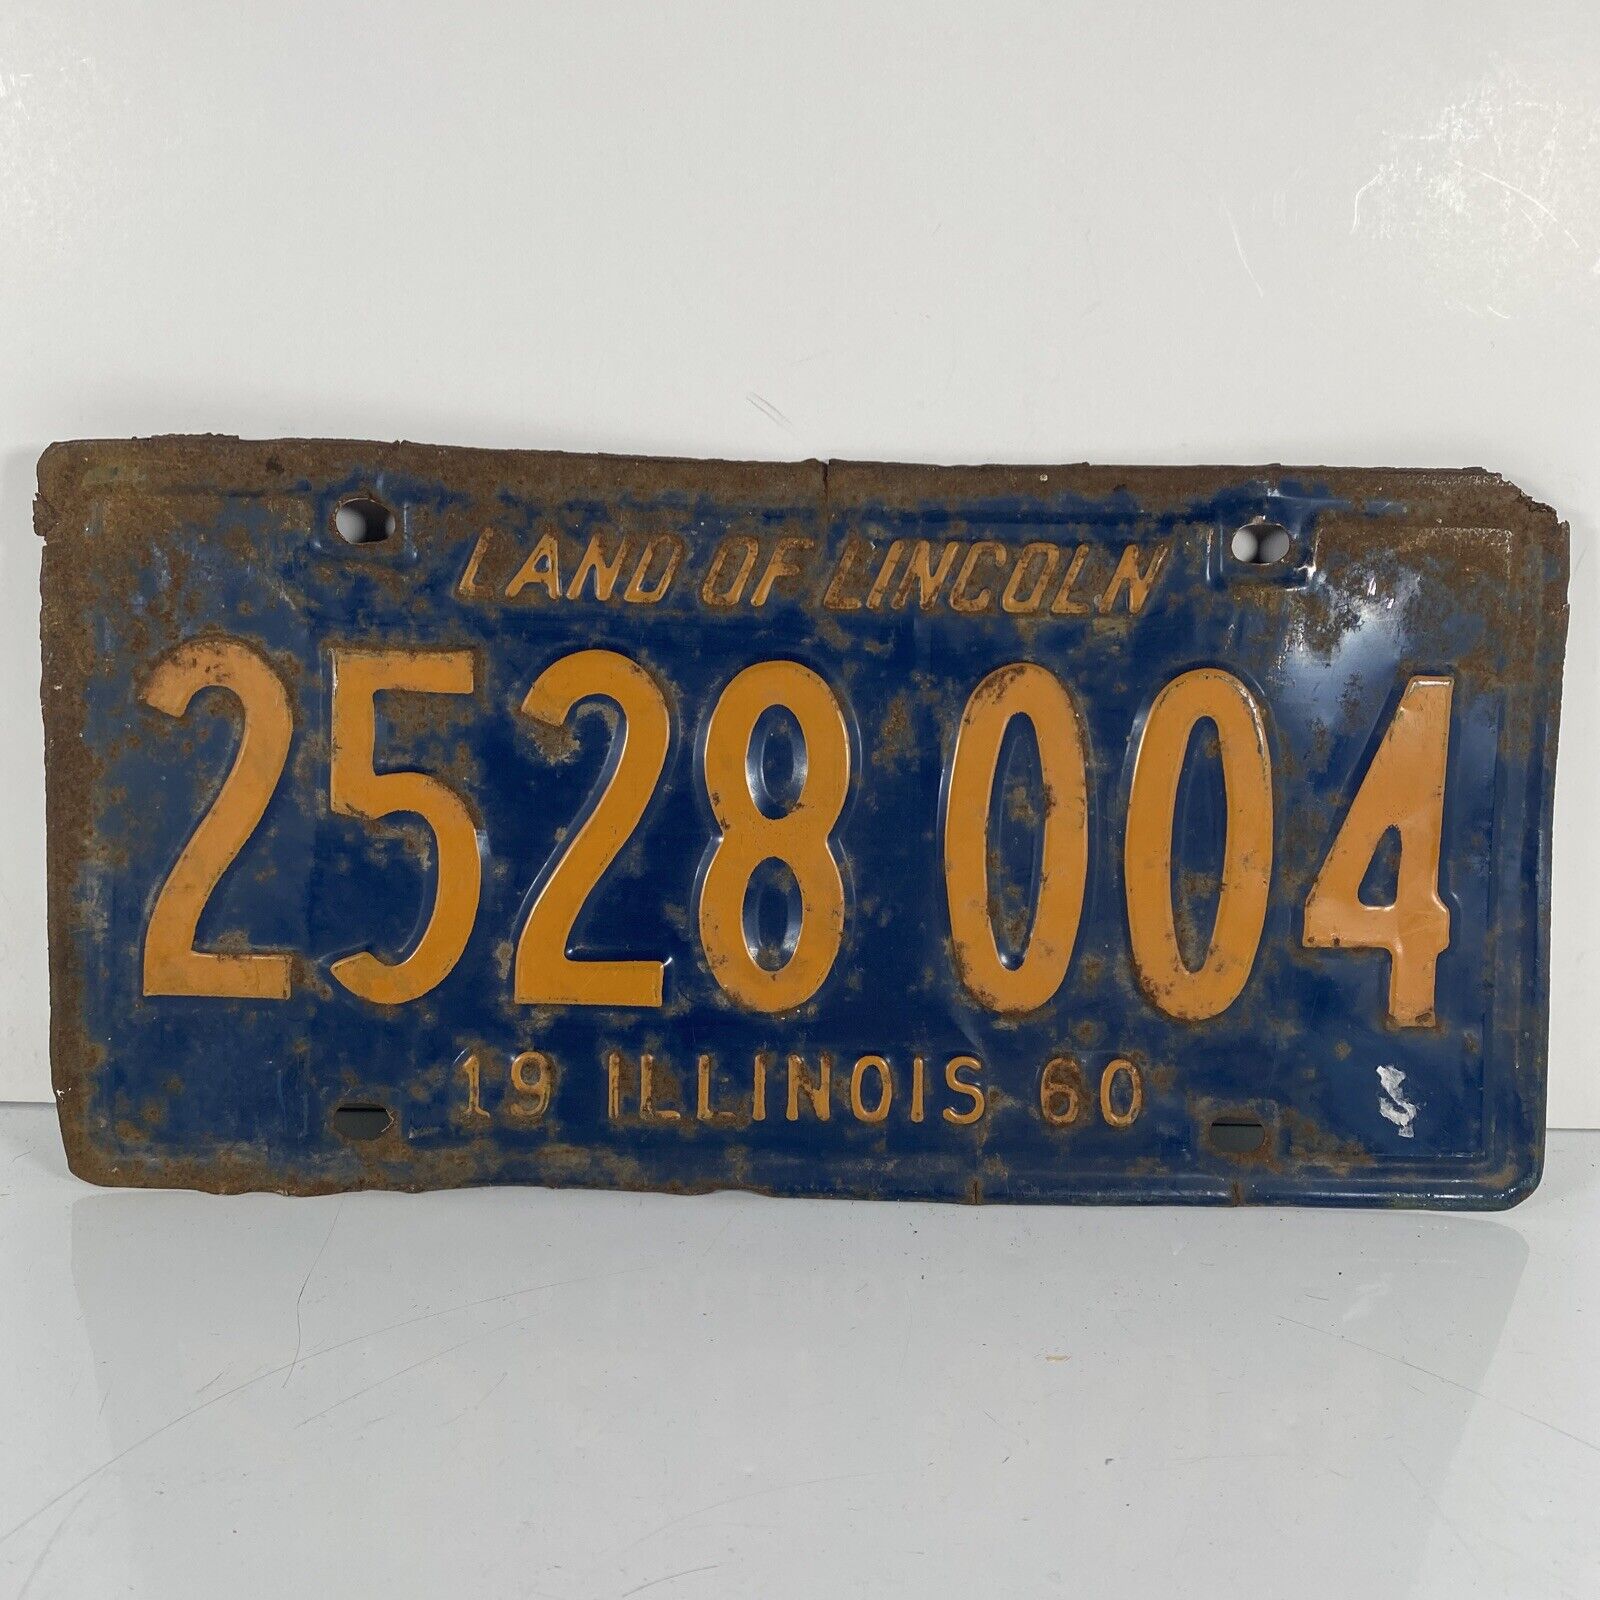 Illinois 1960 License Plate Land Of Lincoln 2528 004 Vintage Collectible